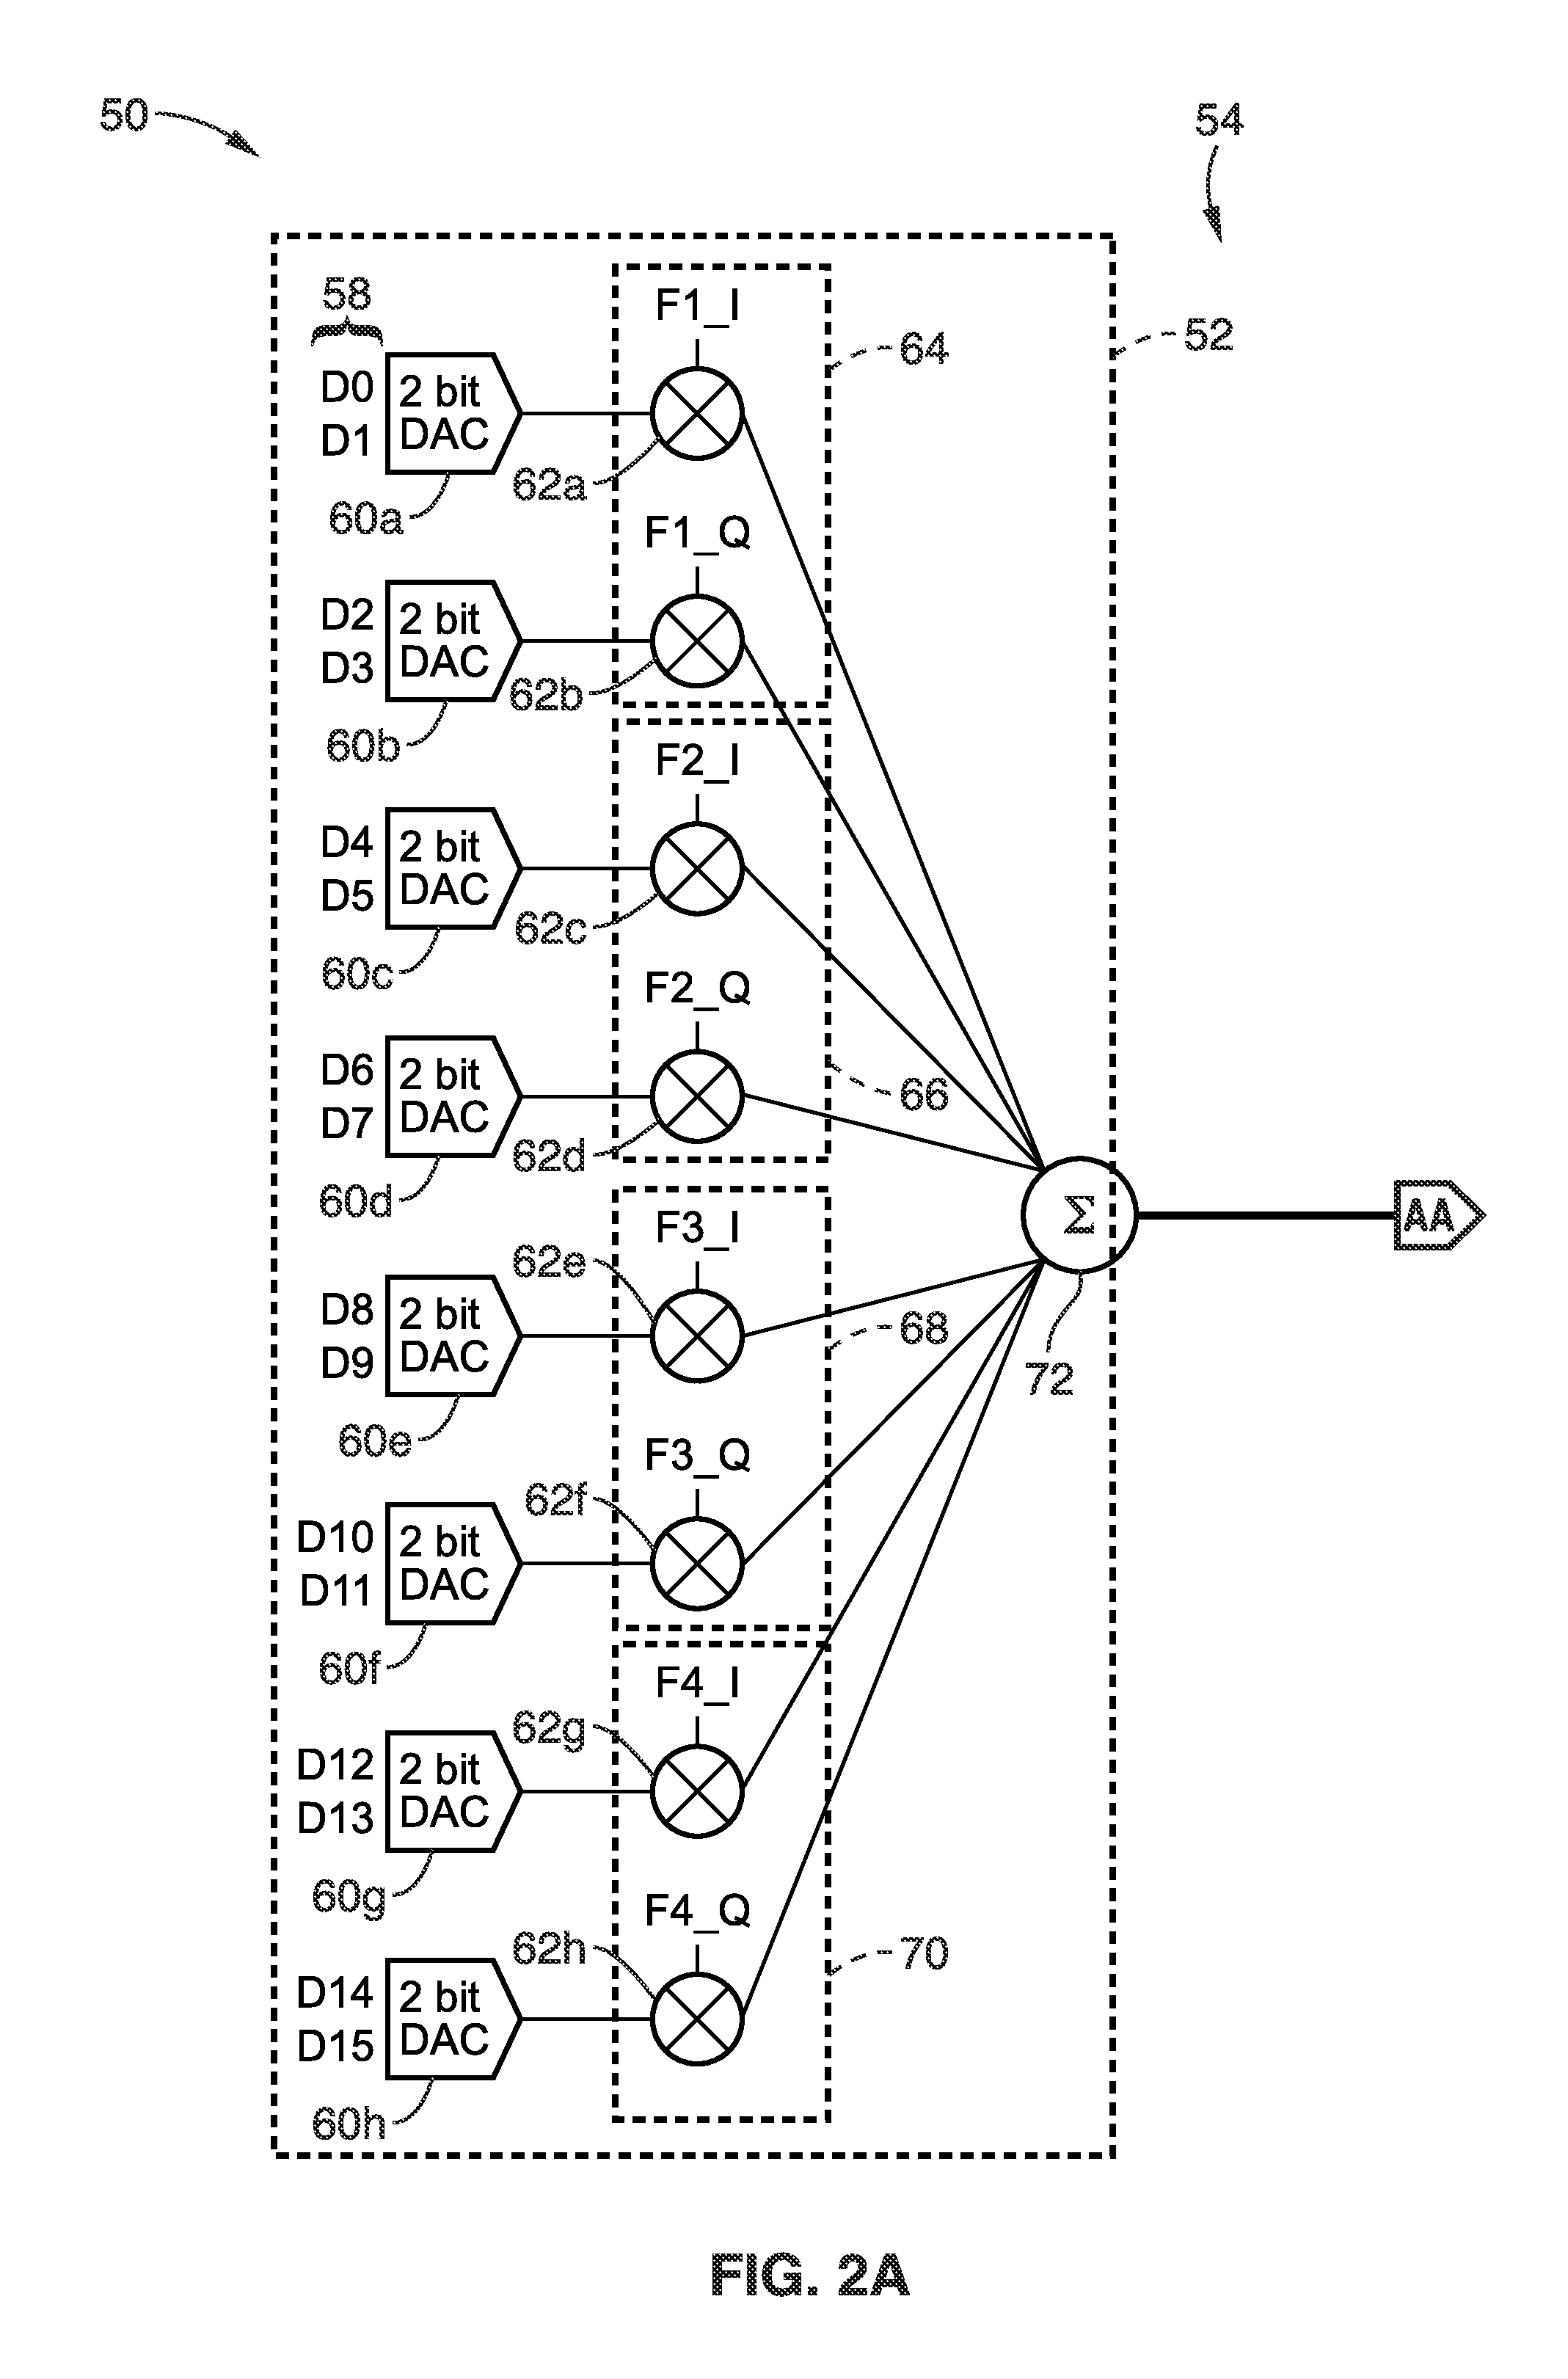 Scalable serial/de-serial I/O for chip-to-chip connection based on multi-frequency QAM scheme